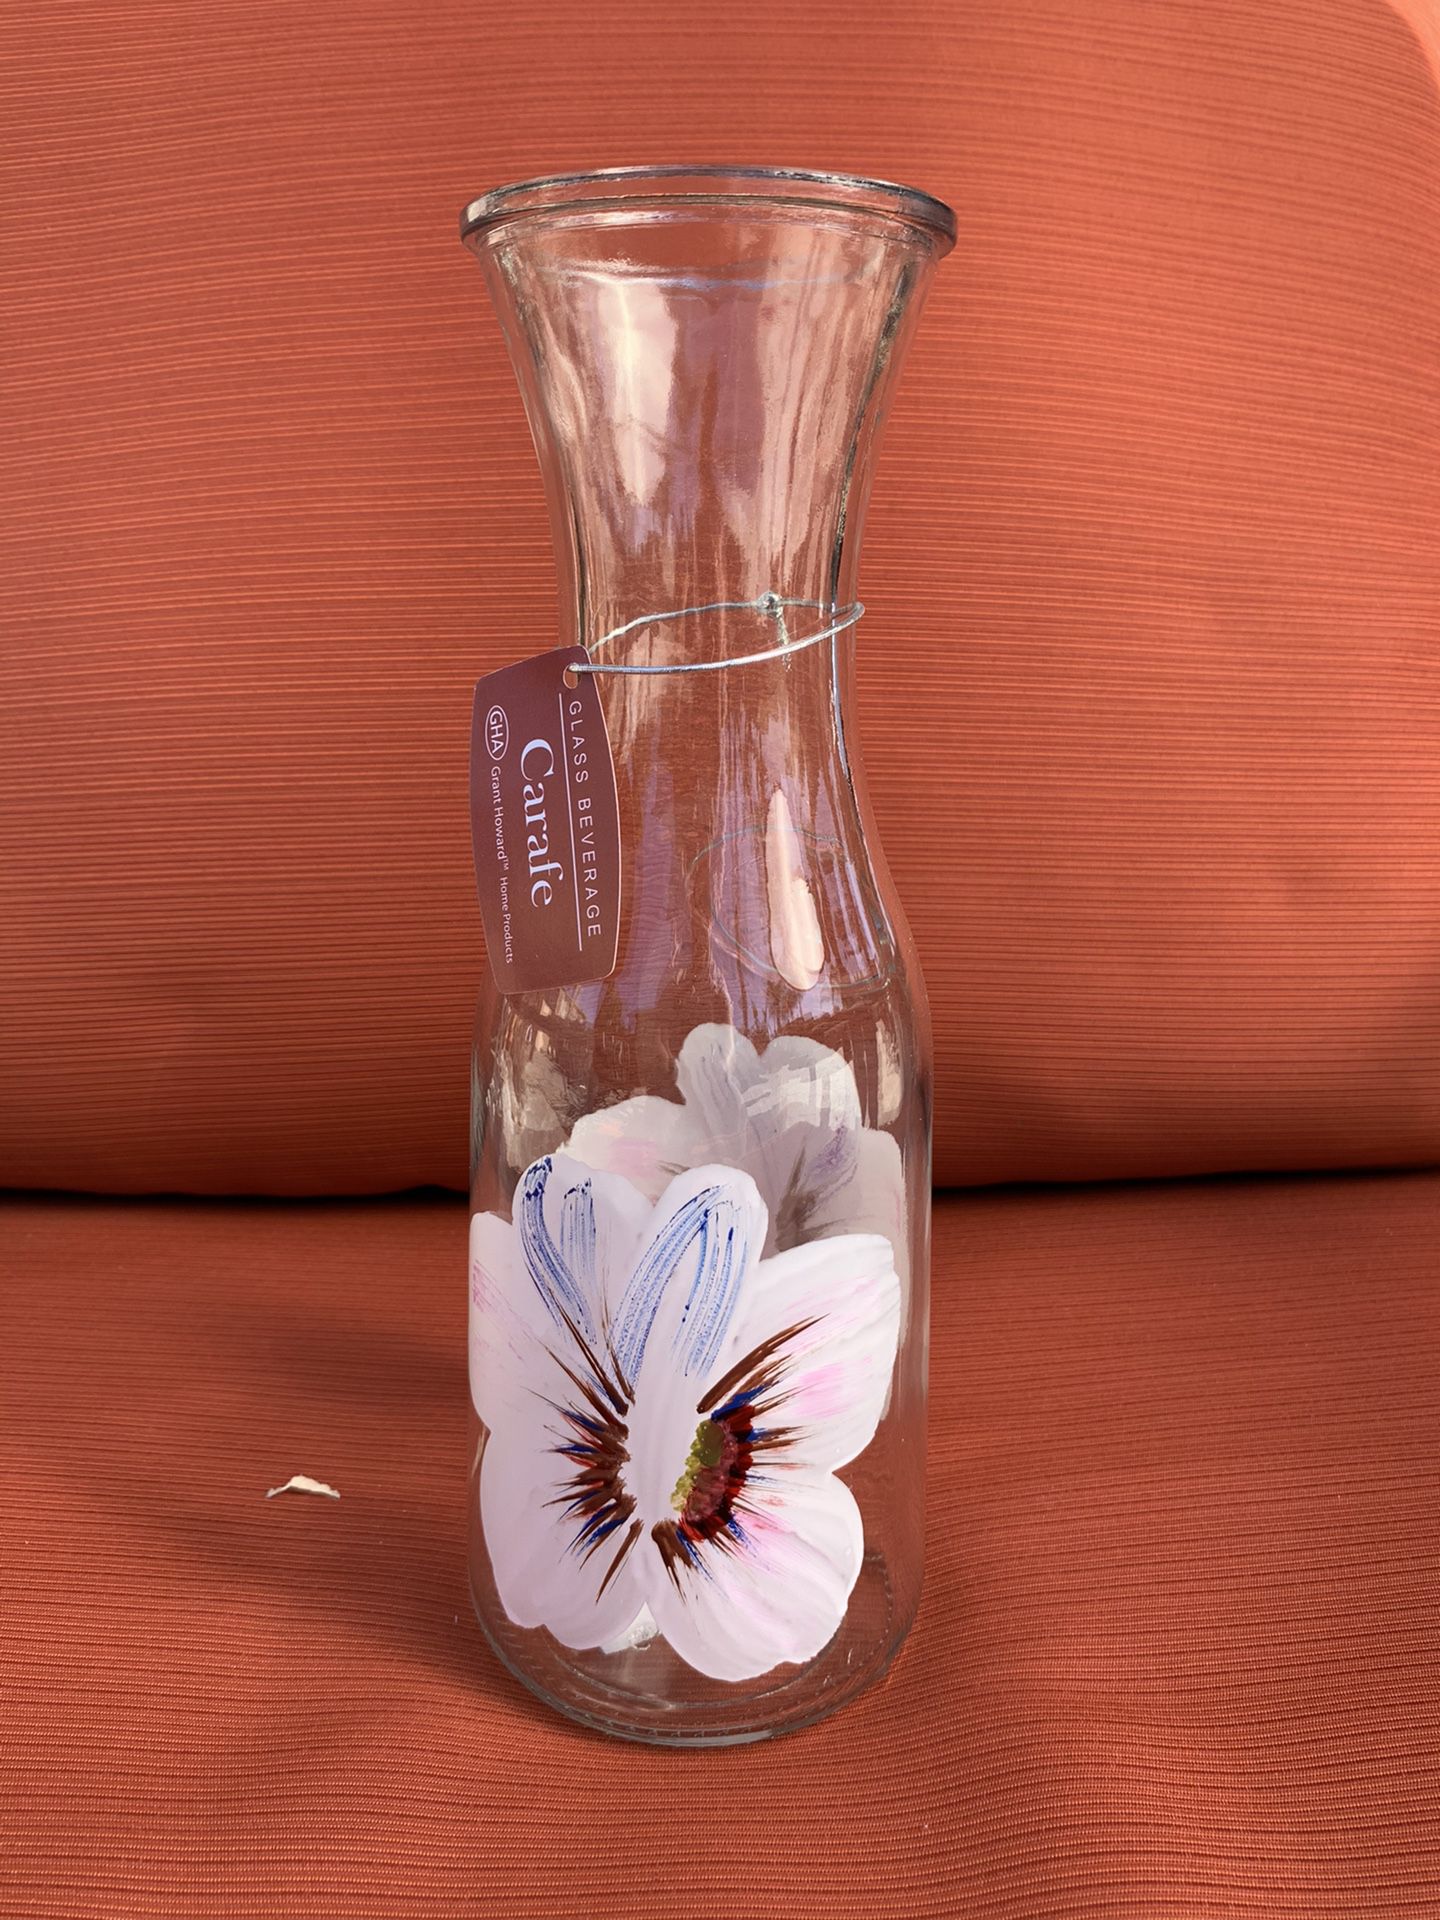 New Grant Howard Glass Pitcher Carafe with White Flower